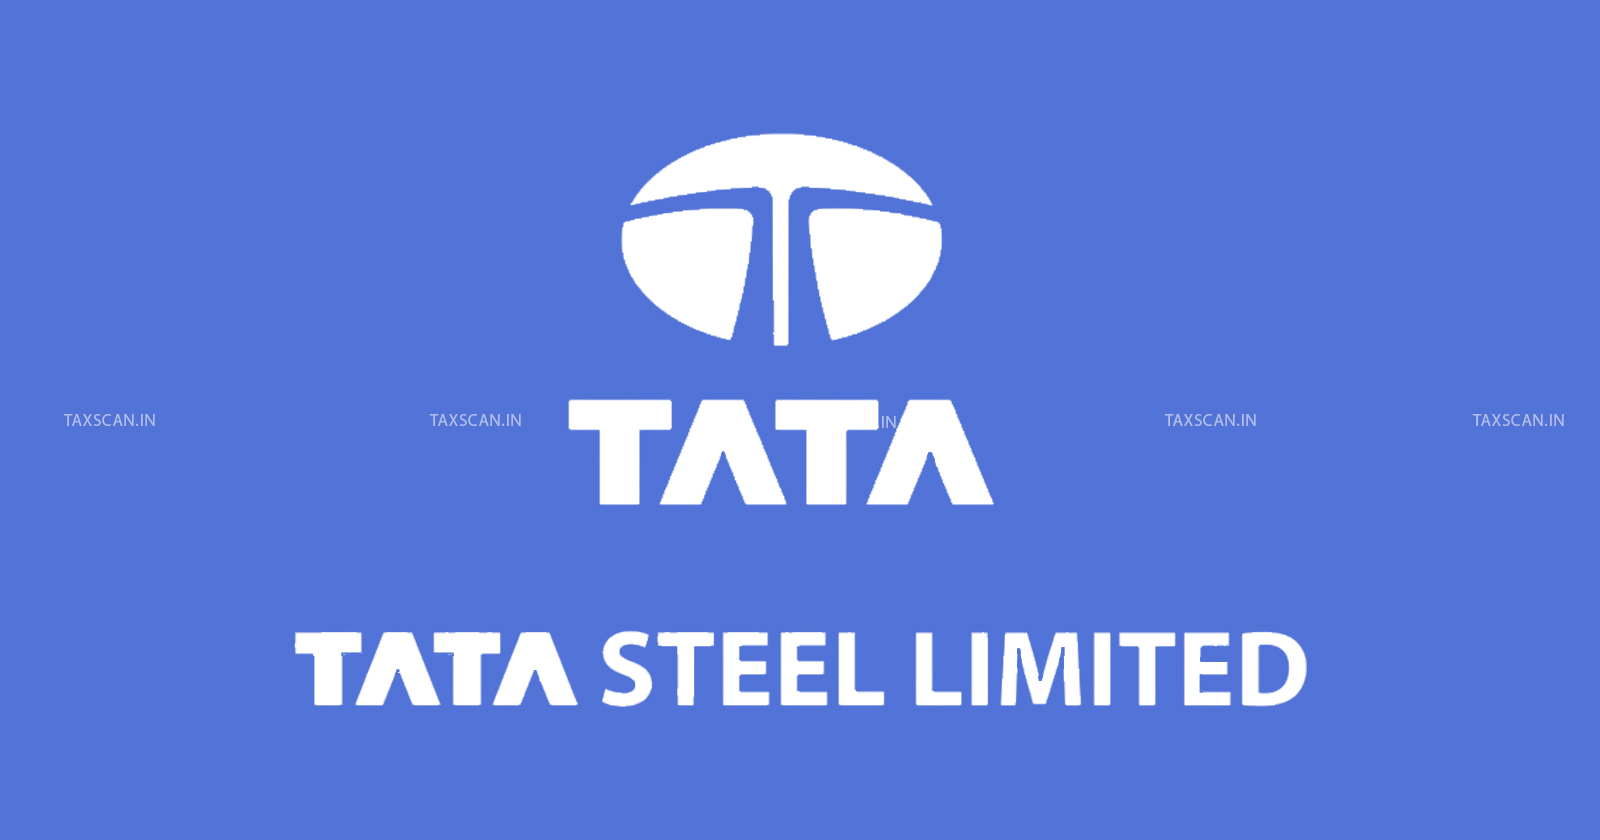 Indian Energy Exchange - Income Tax Appellate Tribunal - Transfer Pricing - Power availed - Income Tax - ITAT News - Tax News - Tata Steel Ltd - TAXSCAN